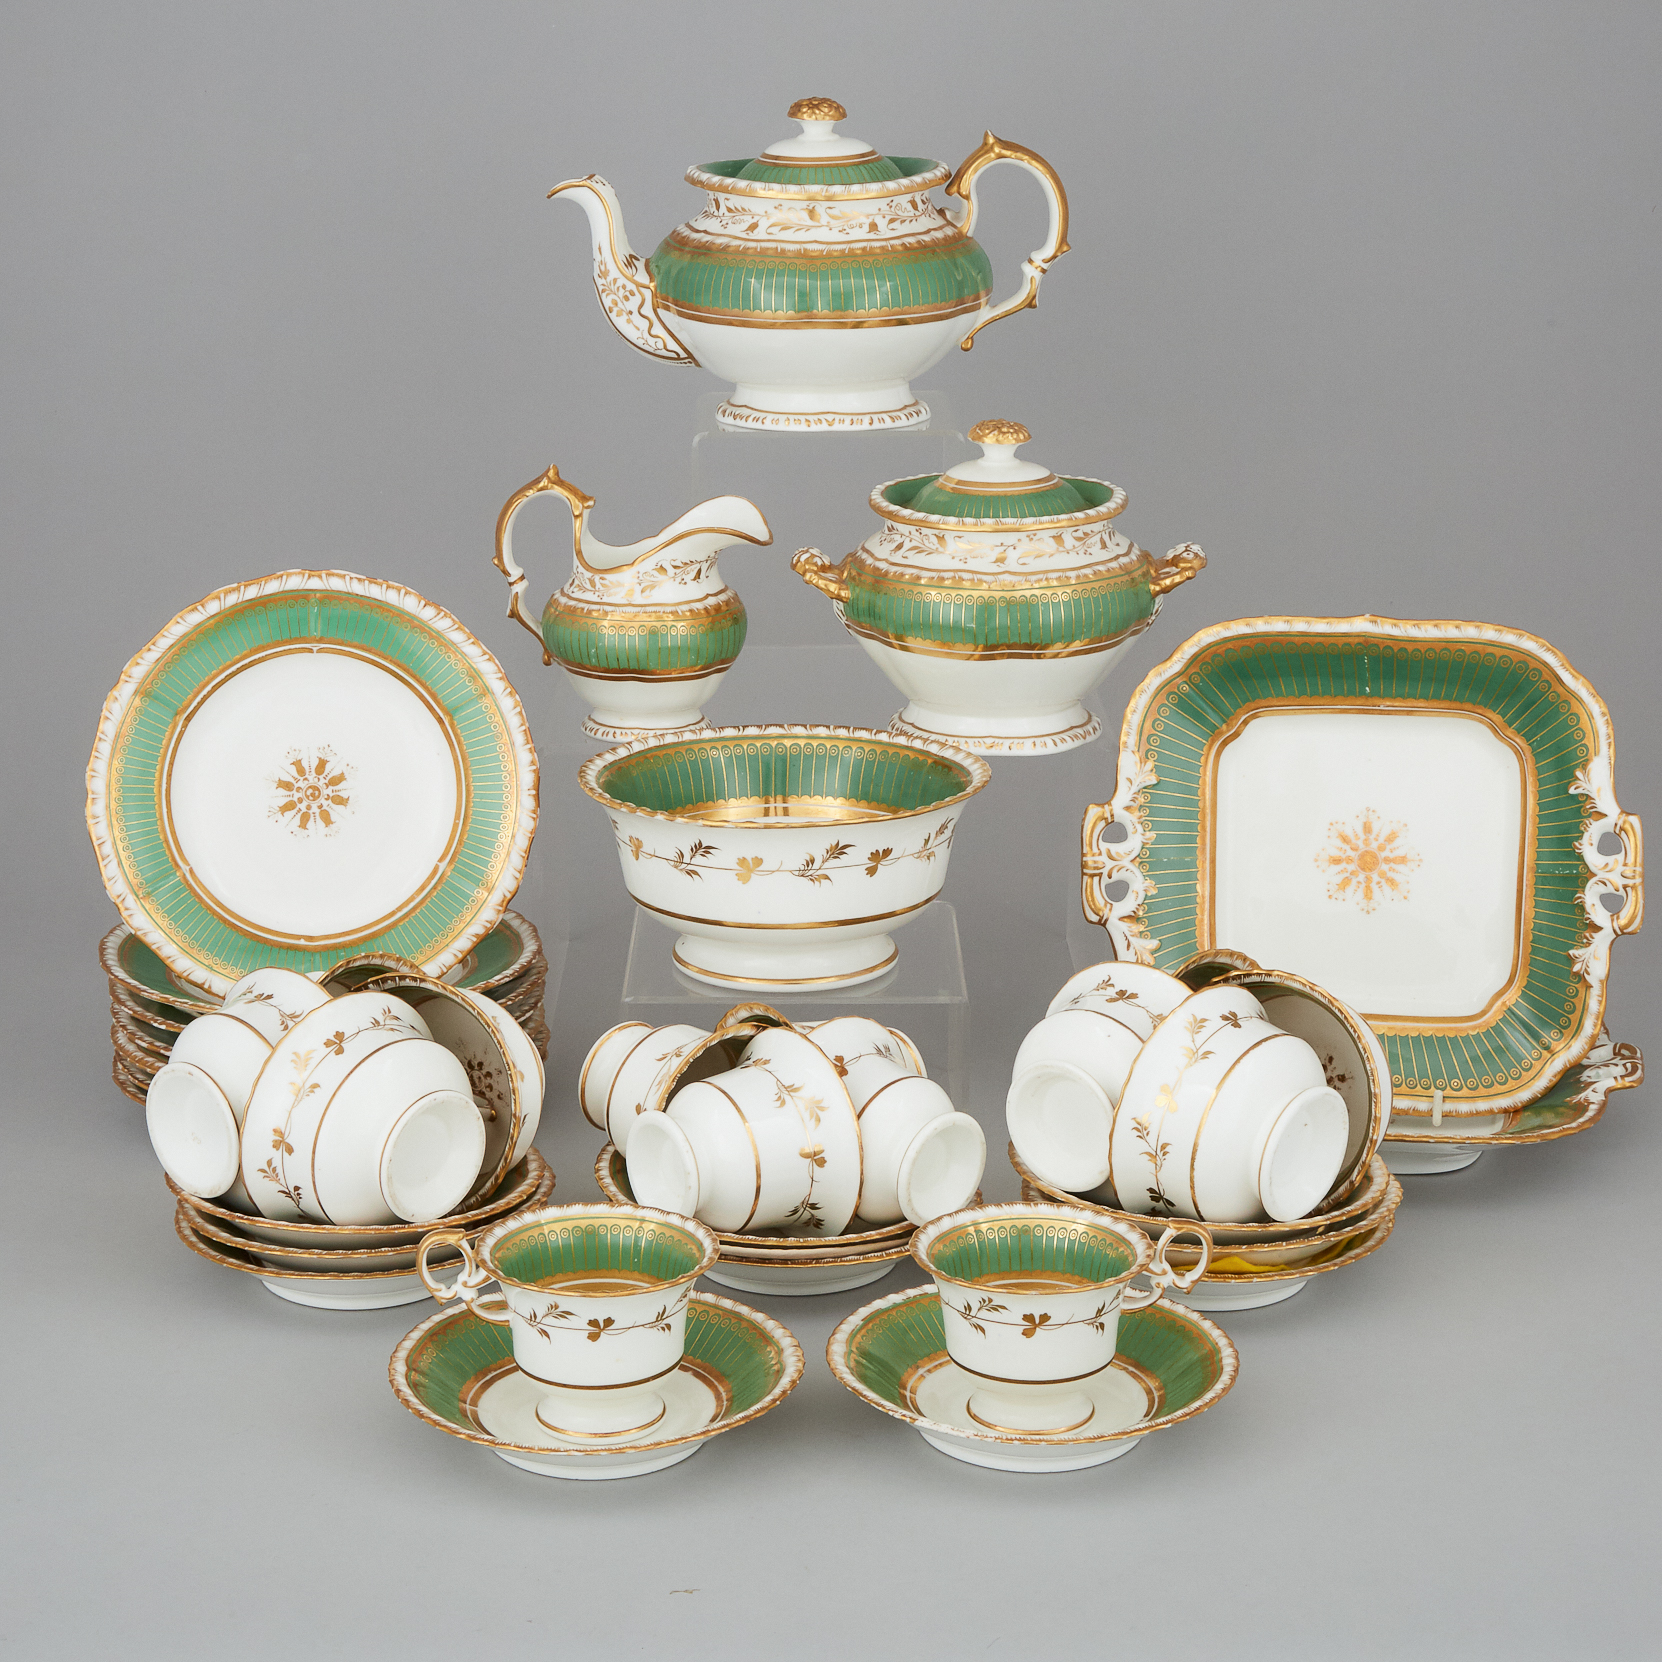 Minton Apple Green Ground and Gilt Decorated Tea Service, c.1840